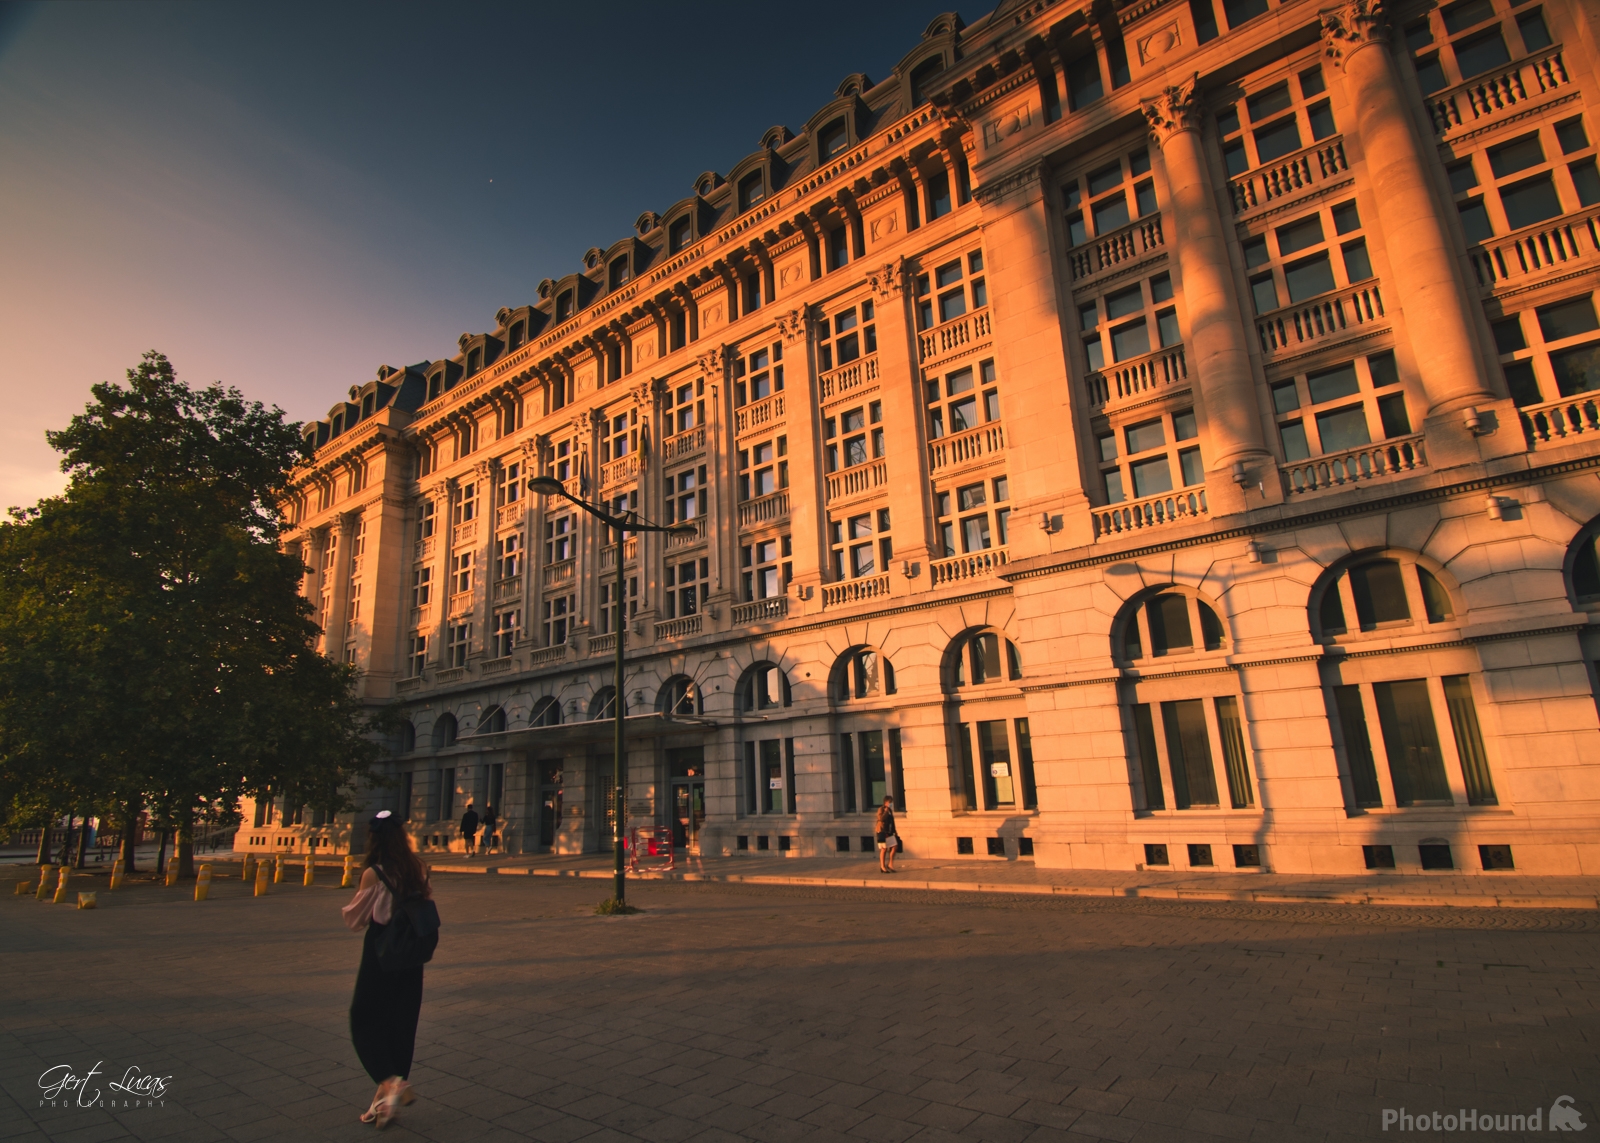 Image of Poulaert Square Brussels by Gert Lucas